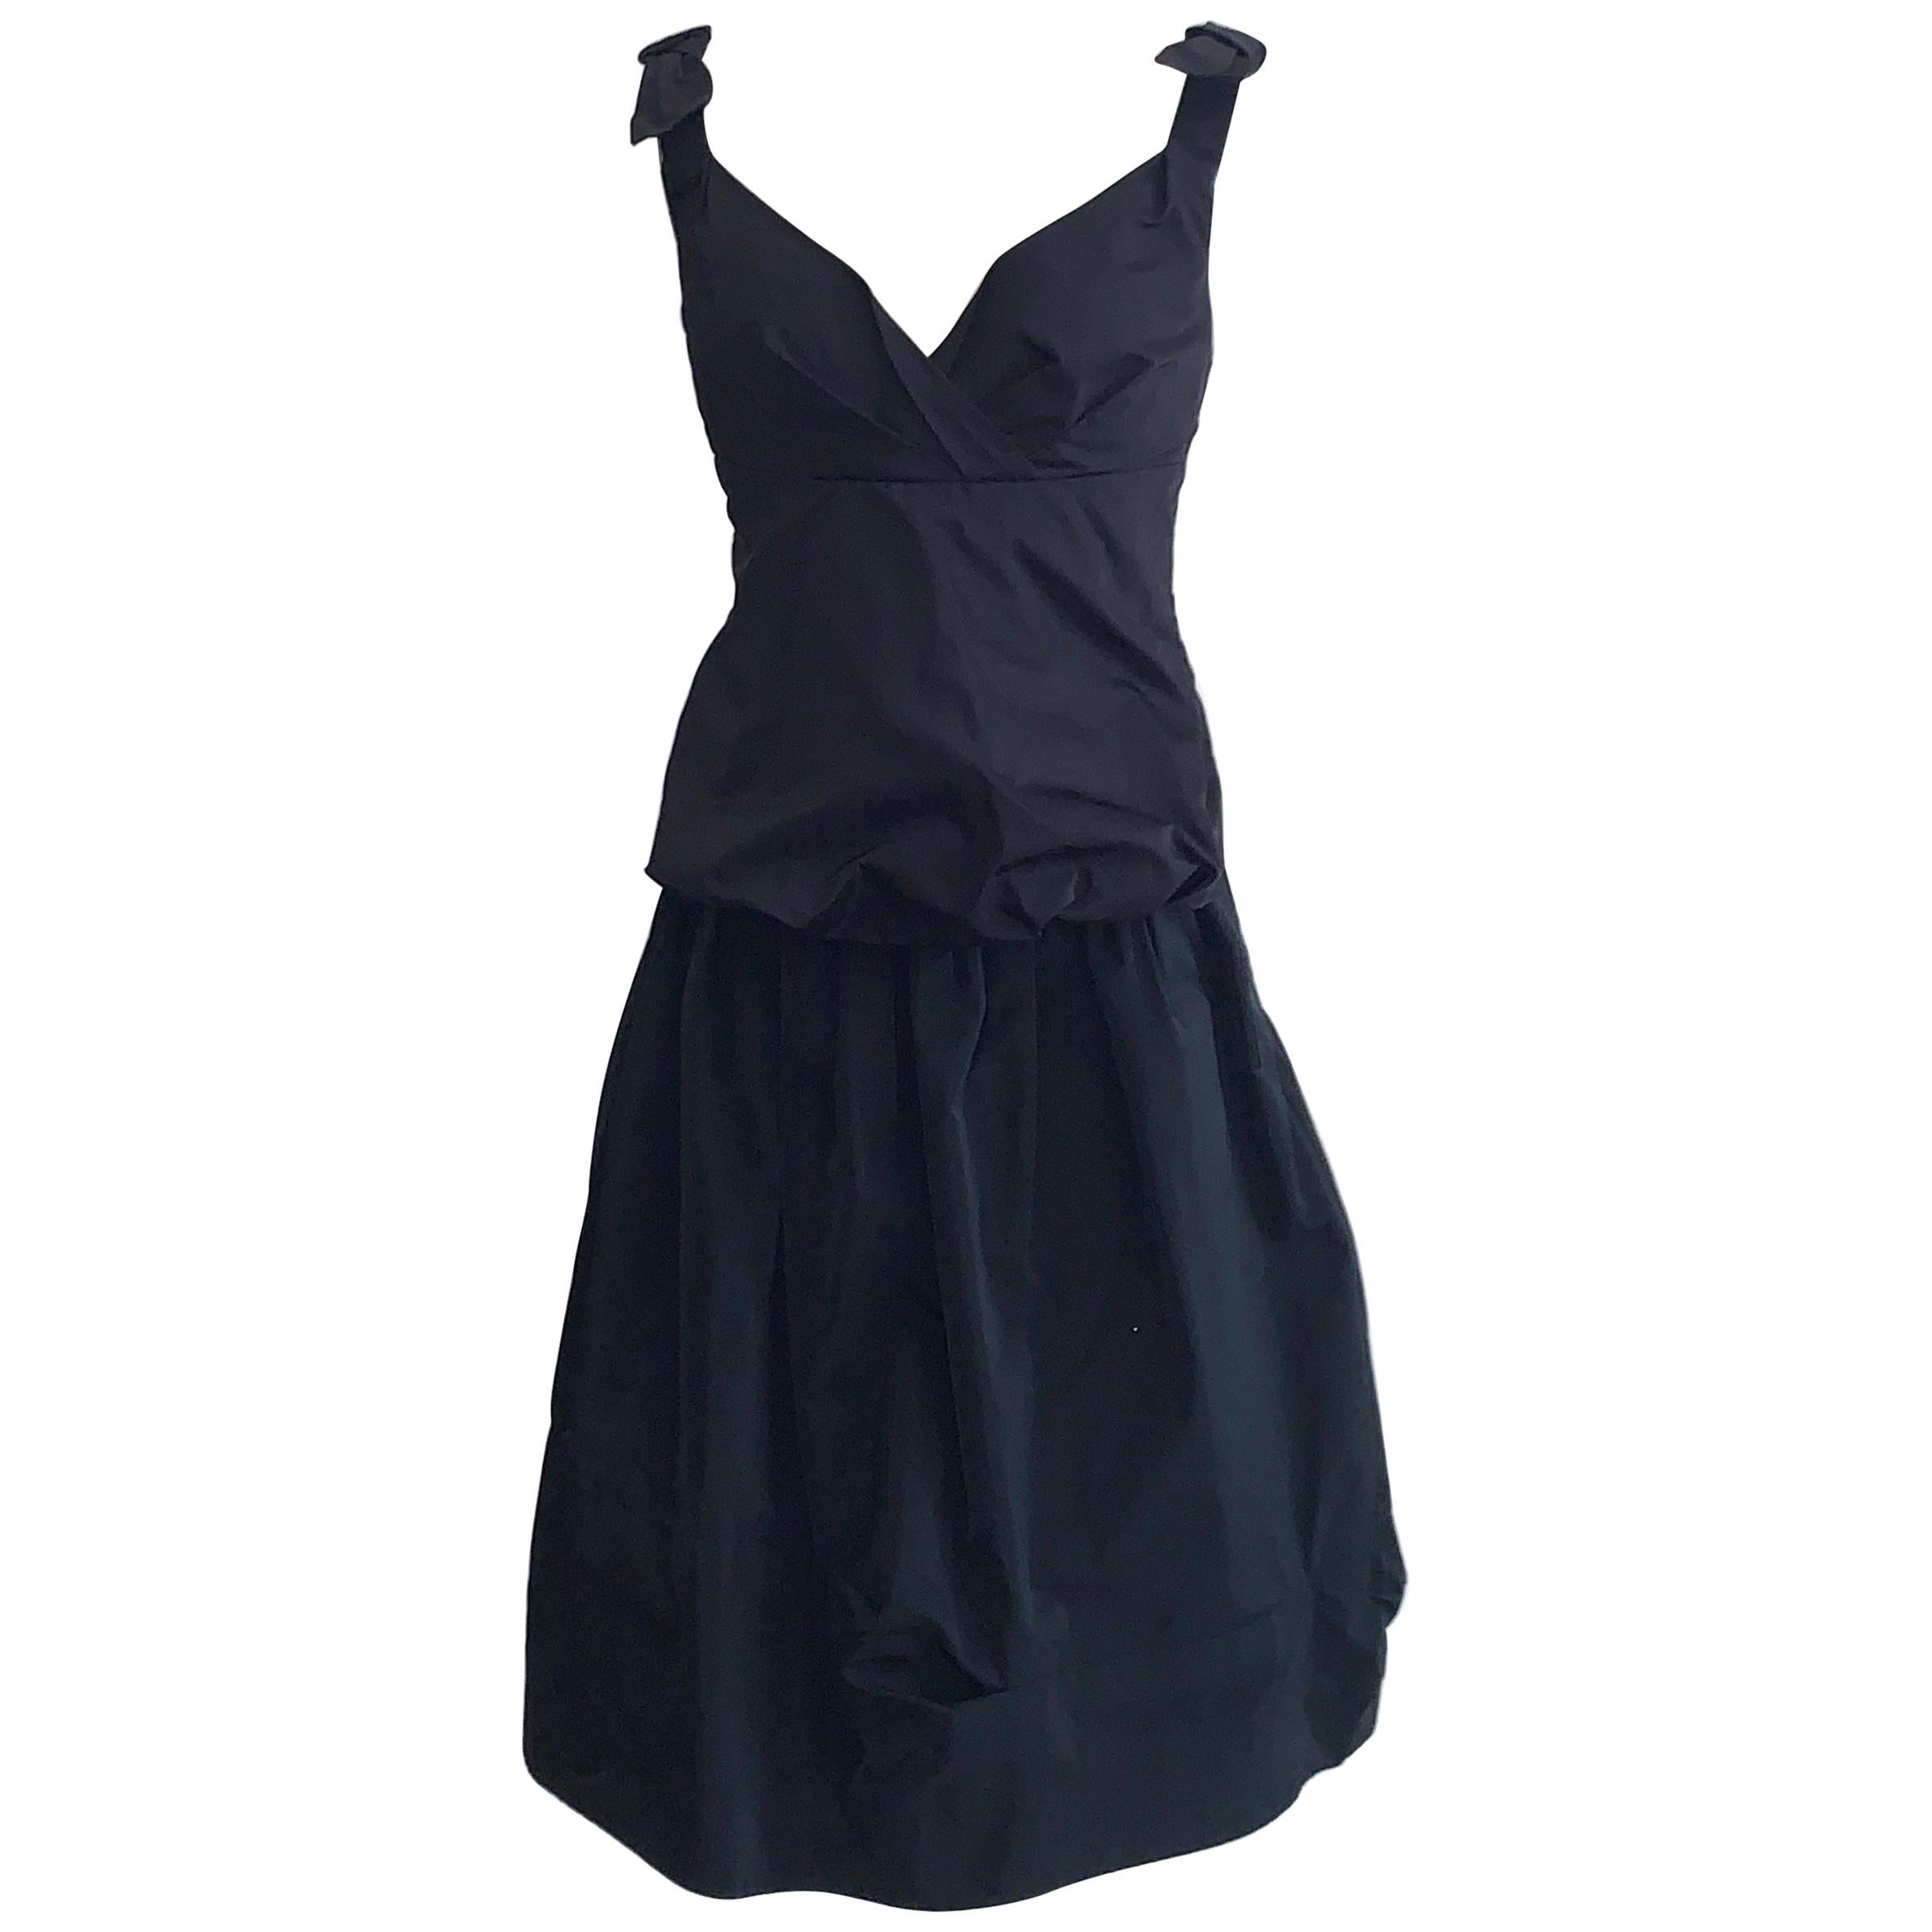 Louis Vuitton Black Bustier Tank and Skirt Set with Bow Detail at Shoulders